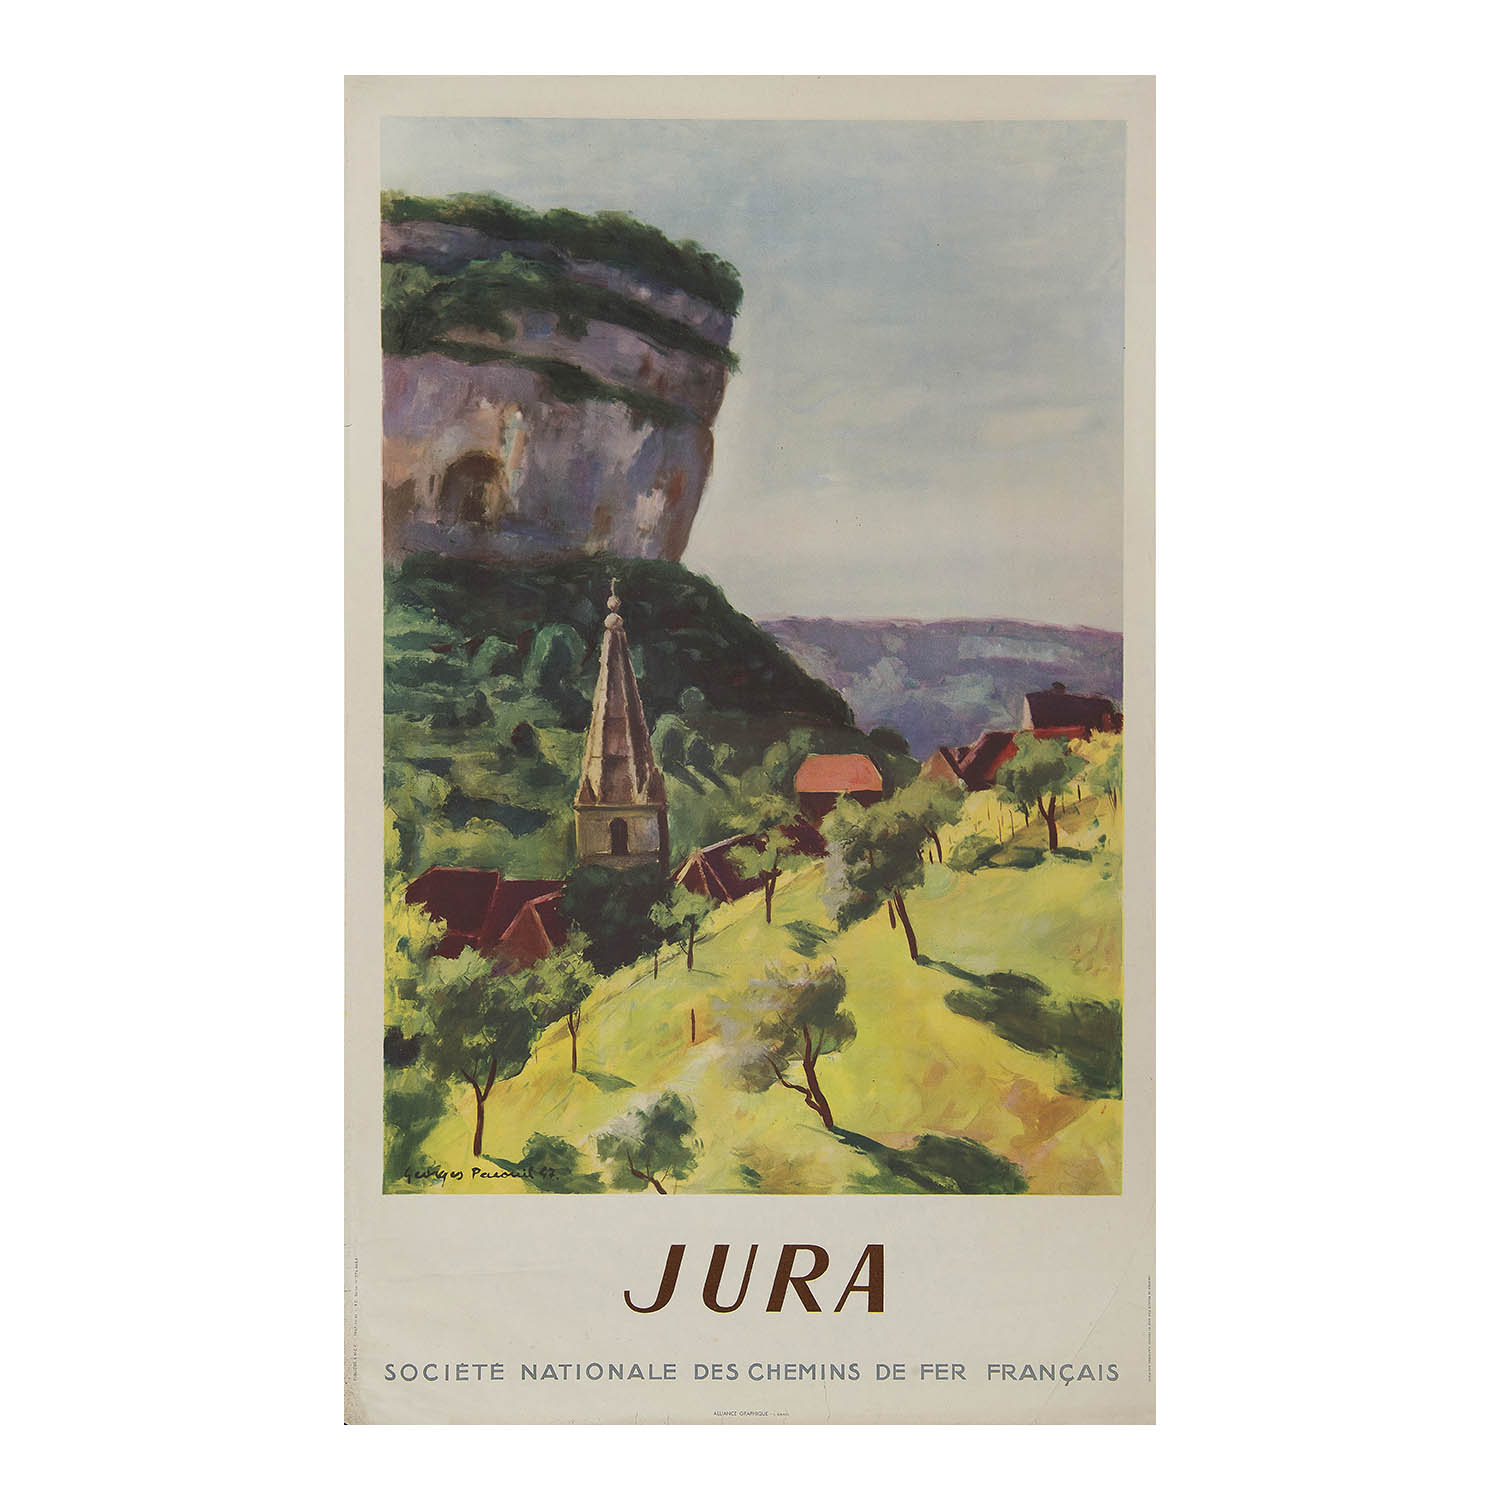 Original French Railways poster for Jura in the Bourgogne-Franche-Comté region of Eastern France, painted by Georges Paronil, 1947. Landscape painting of Jura.